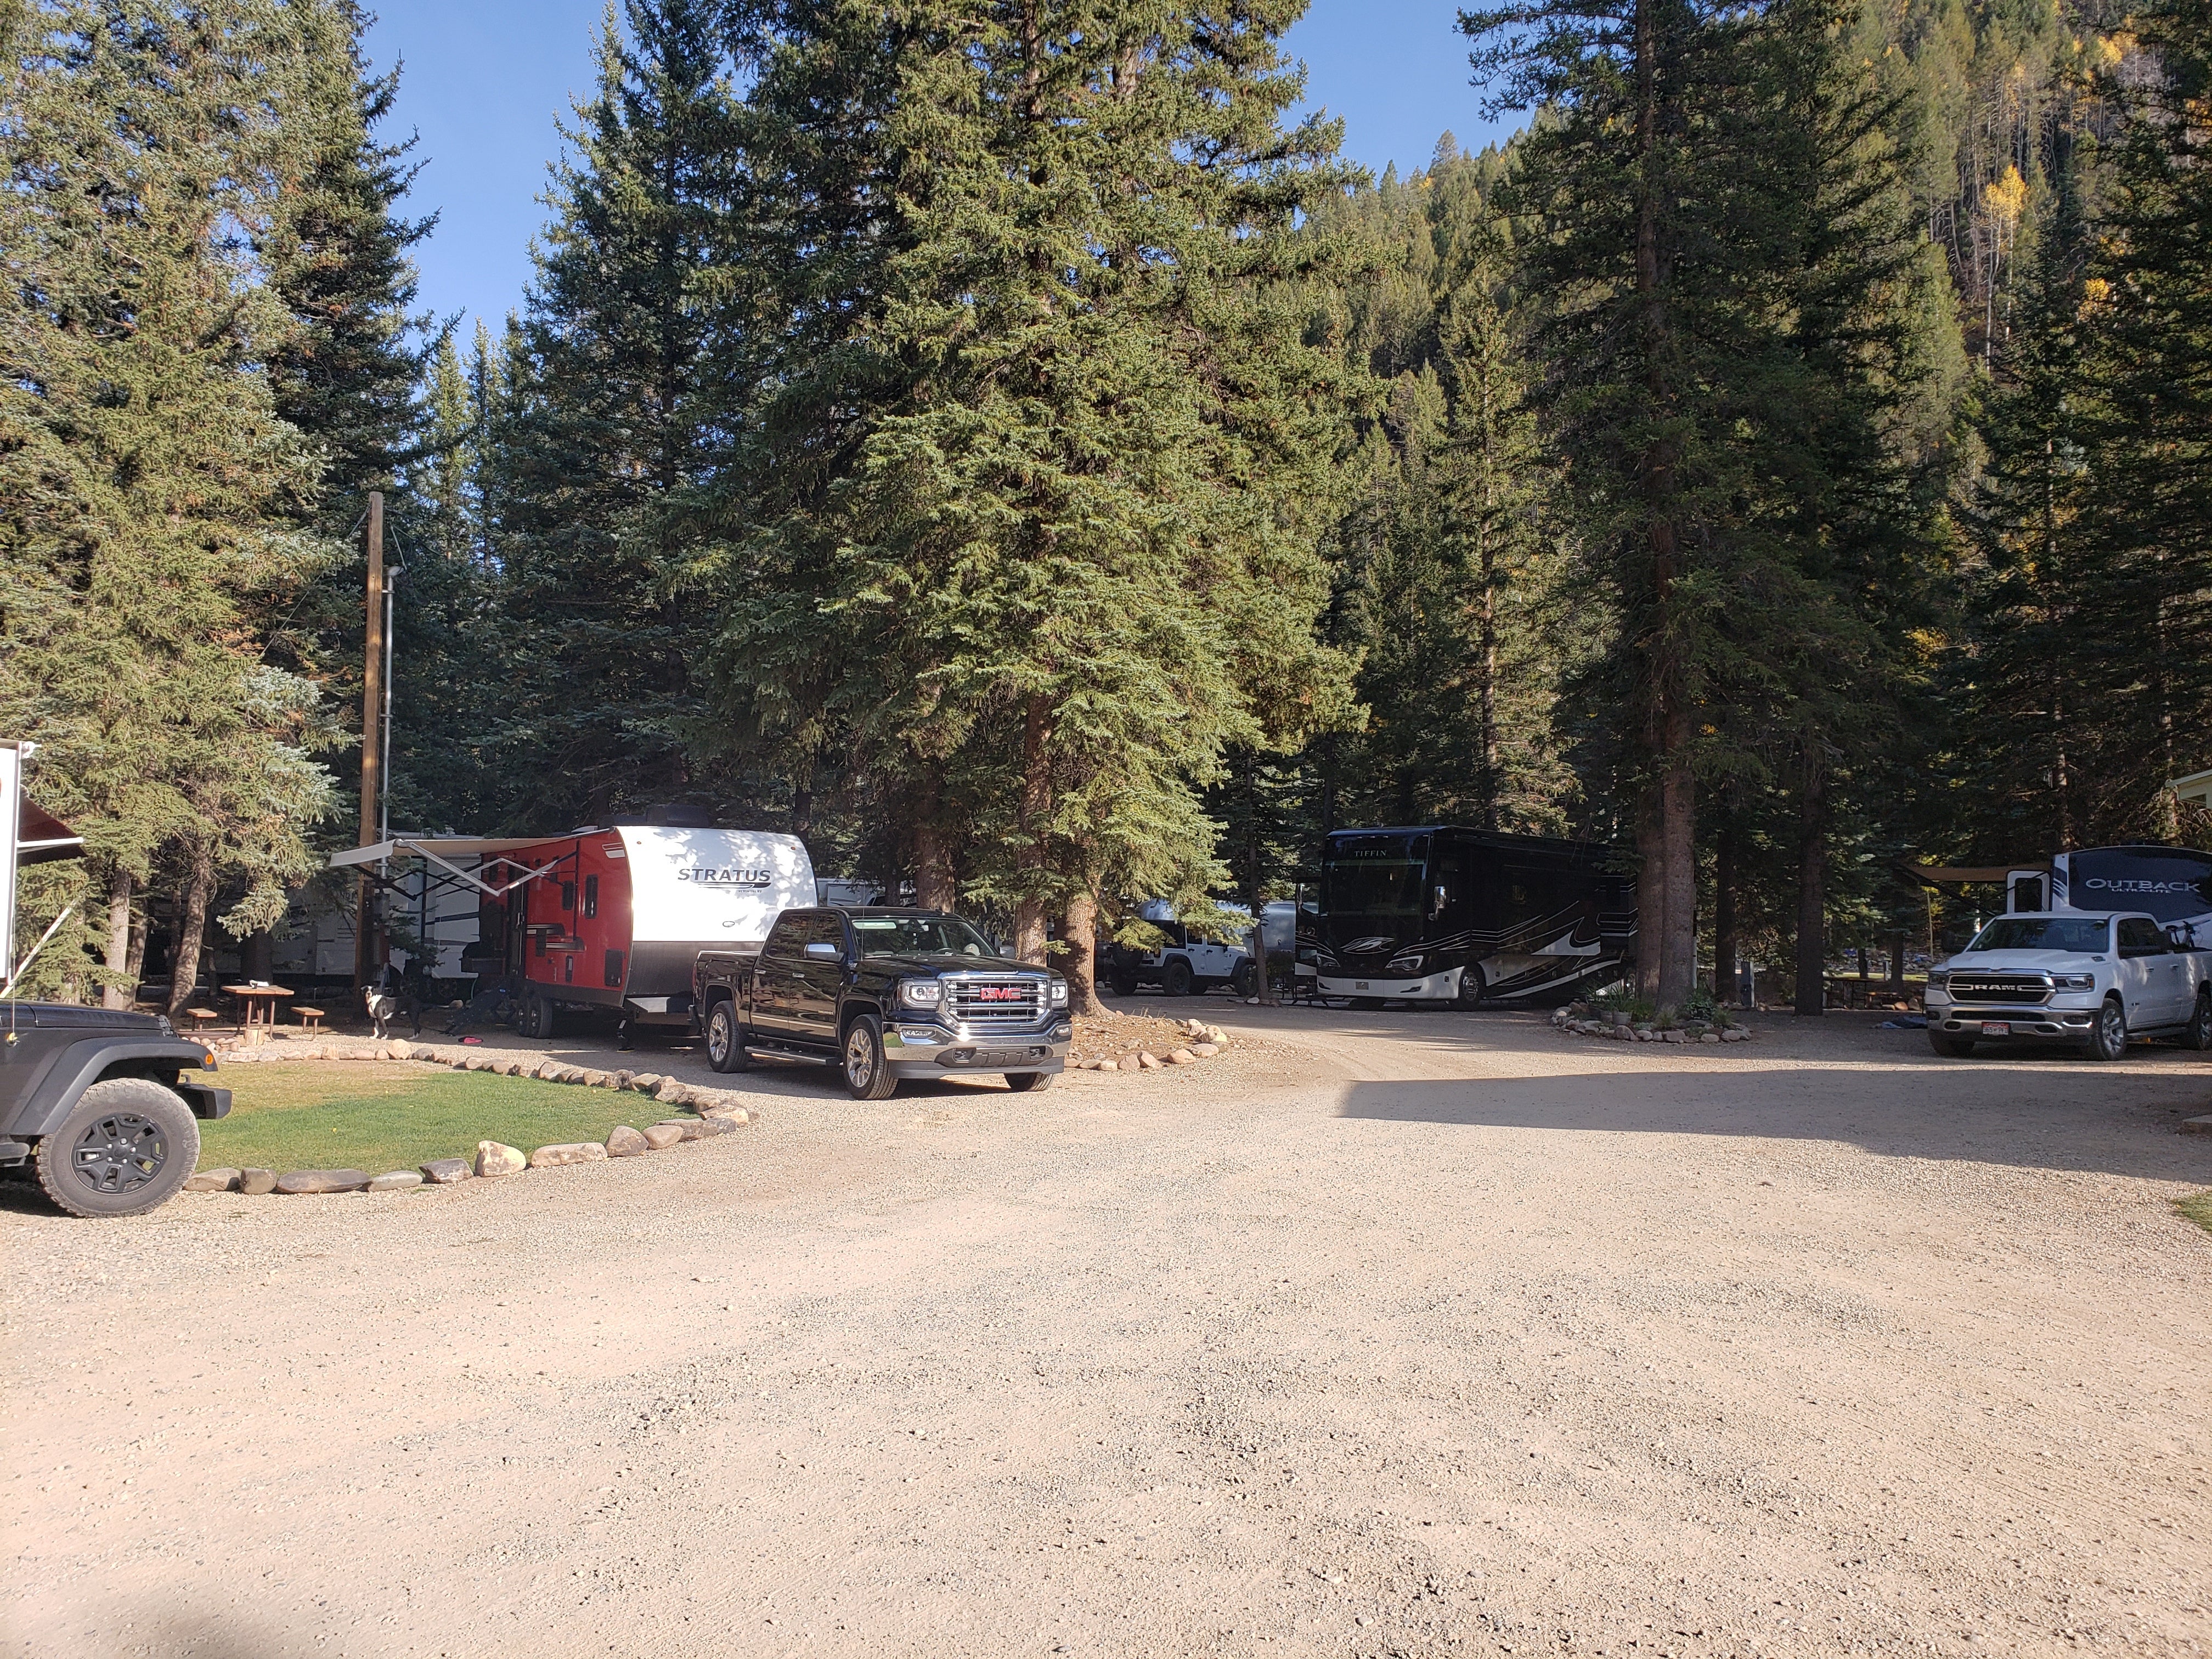 Camper submitted image from Priest Gulch Campground - 5